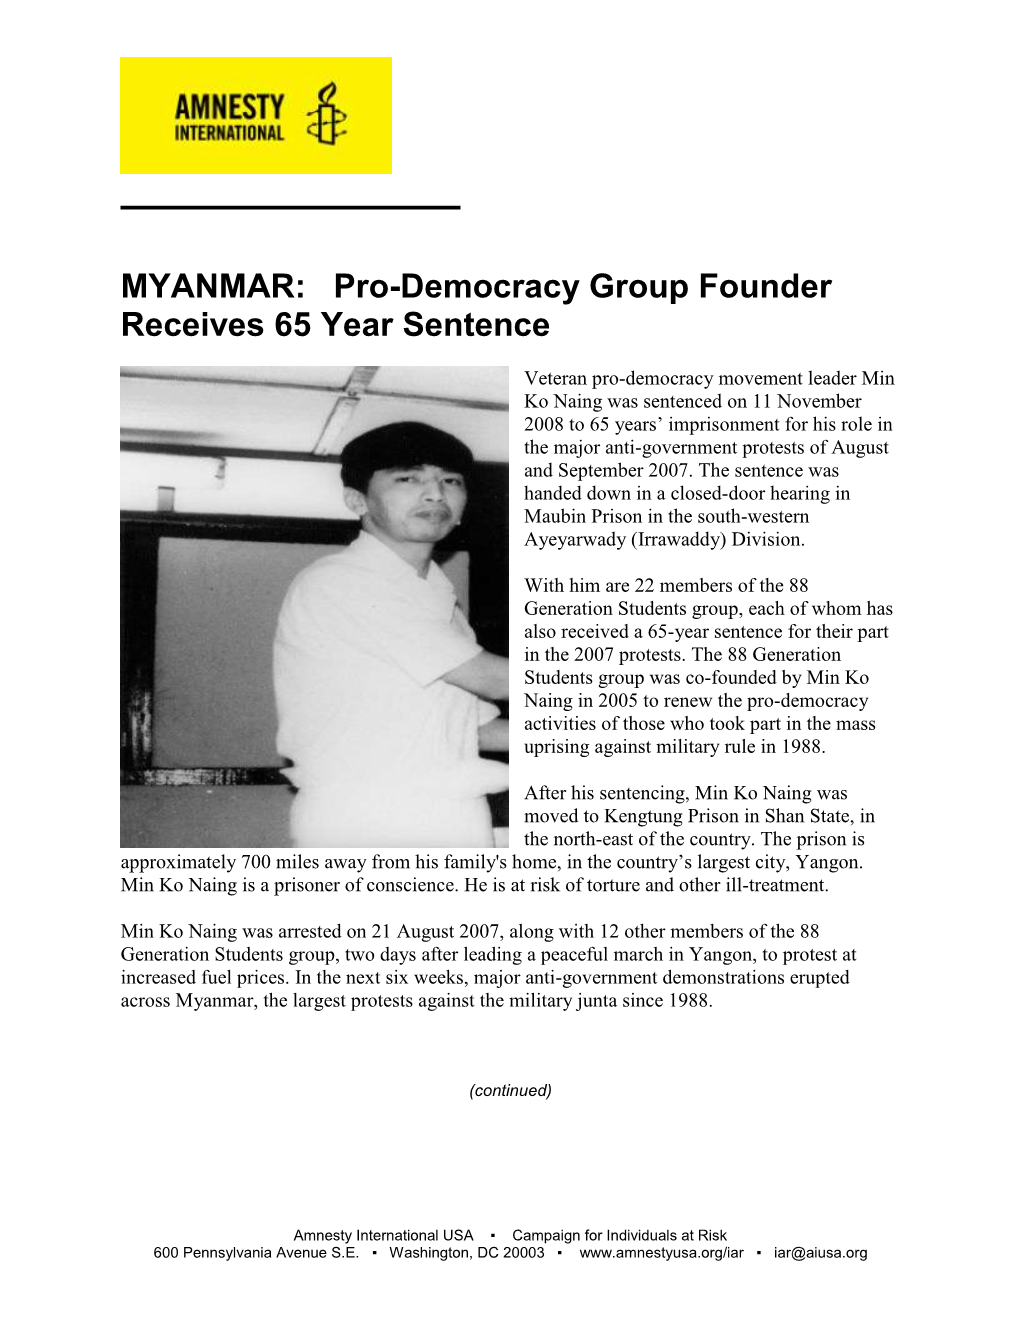 MYANMAR: Pro-Democracy Group Founder Receives 65 Year Sentence